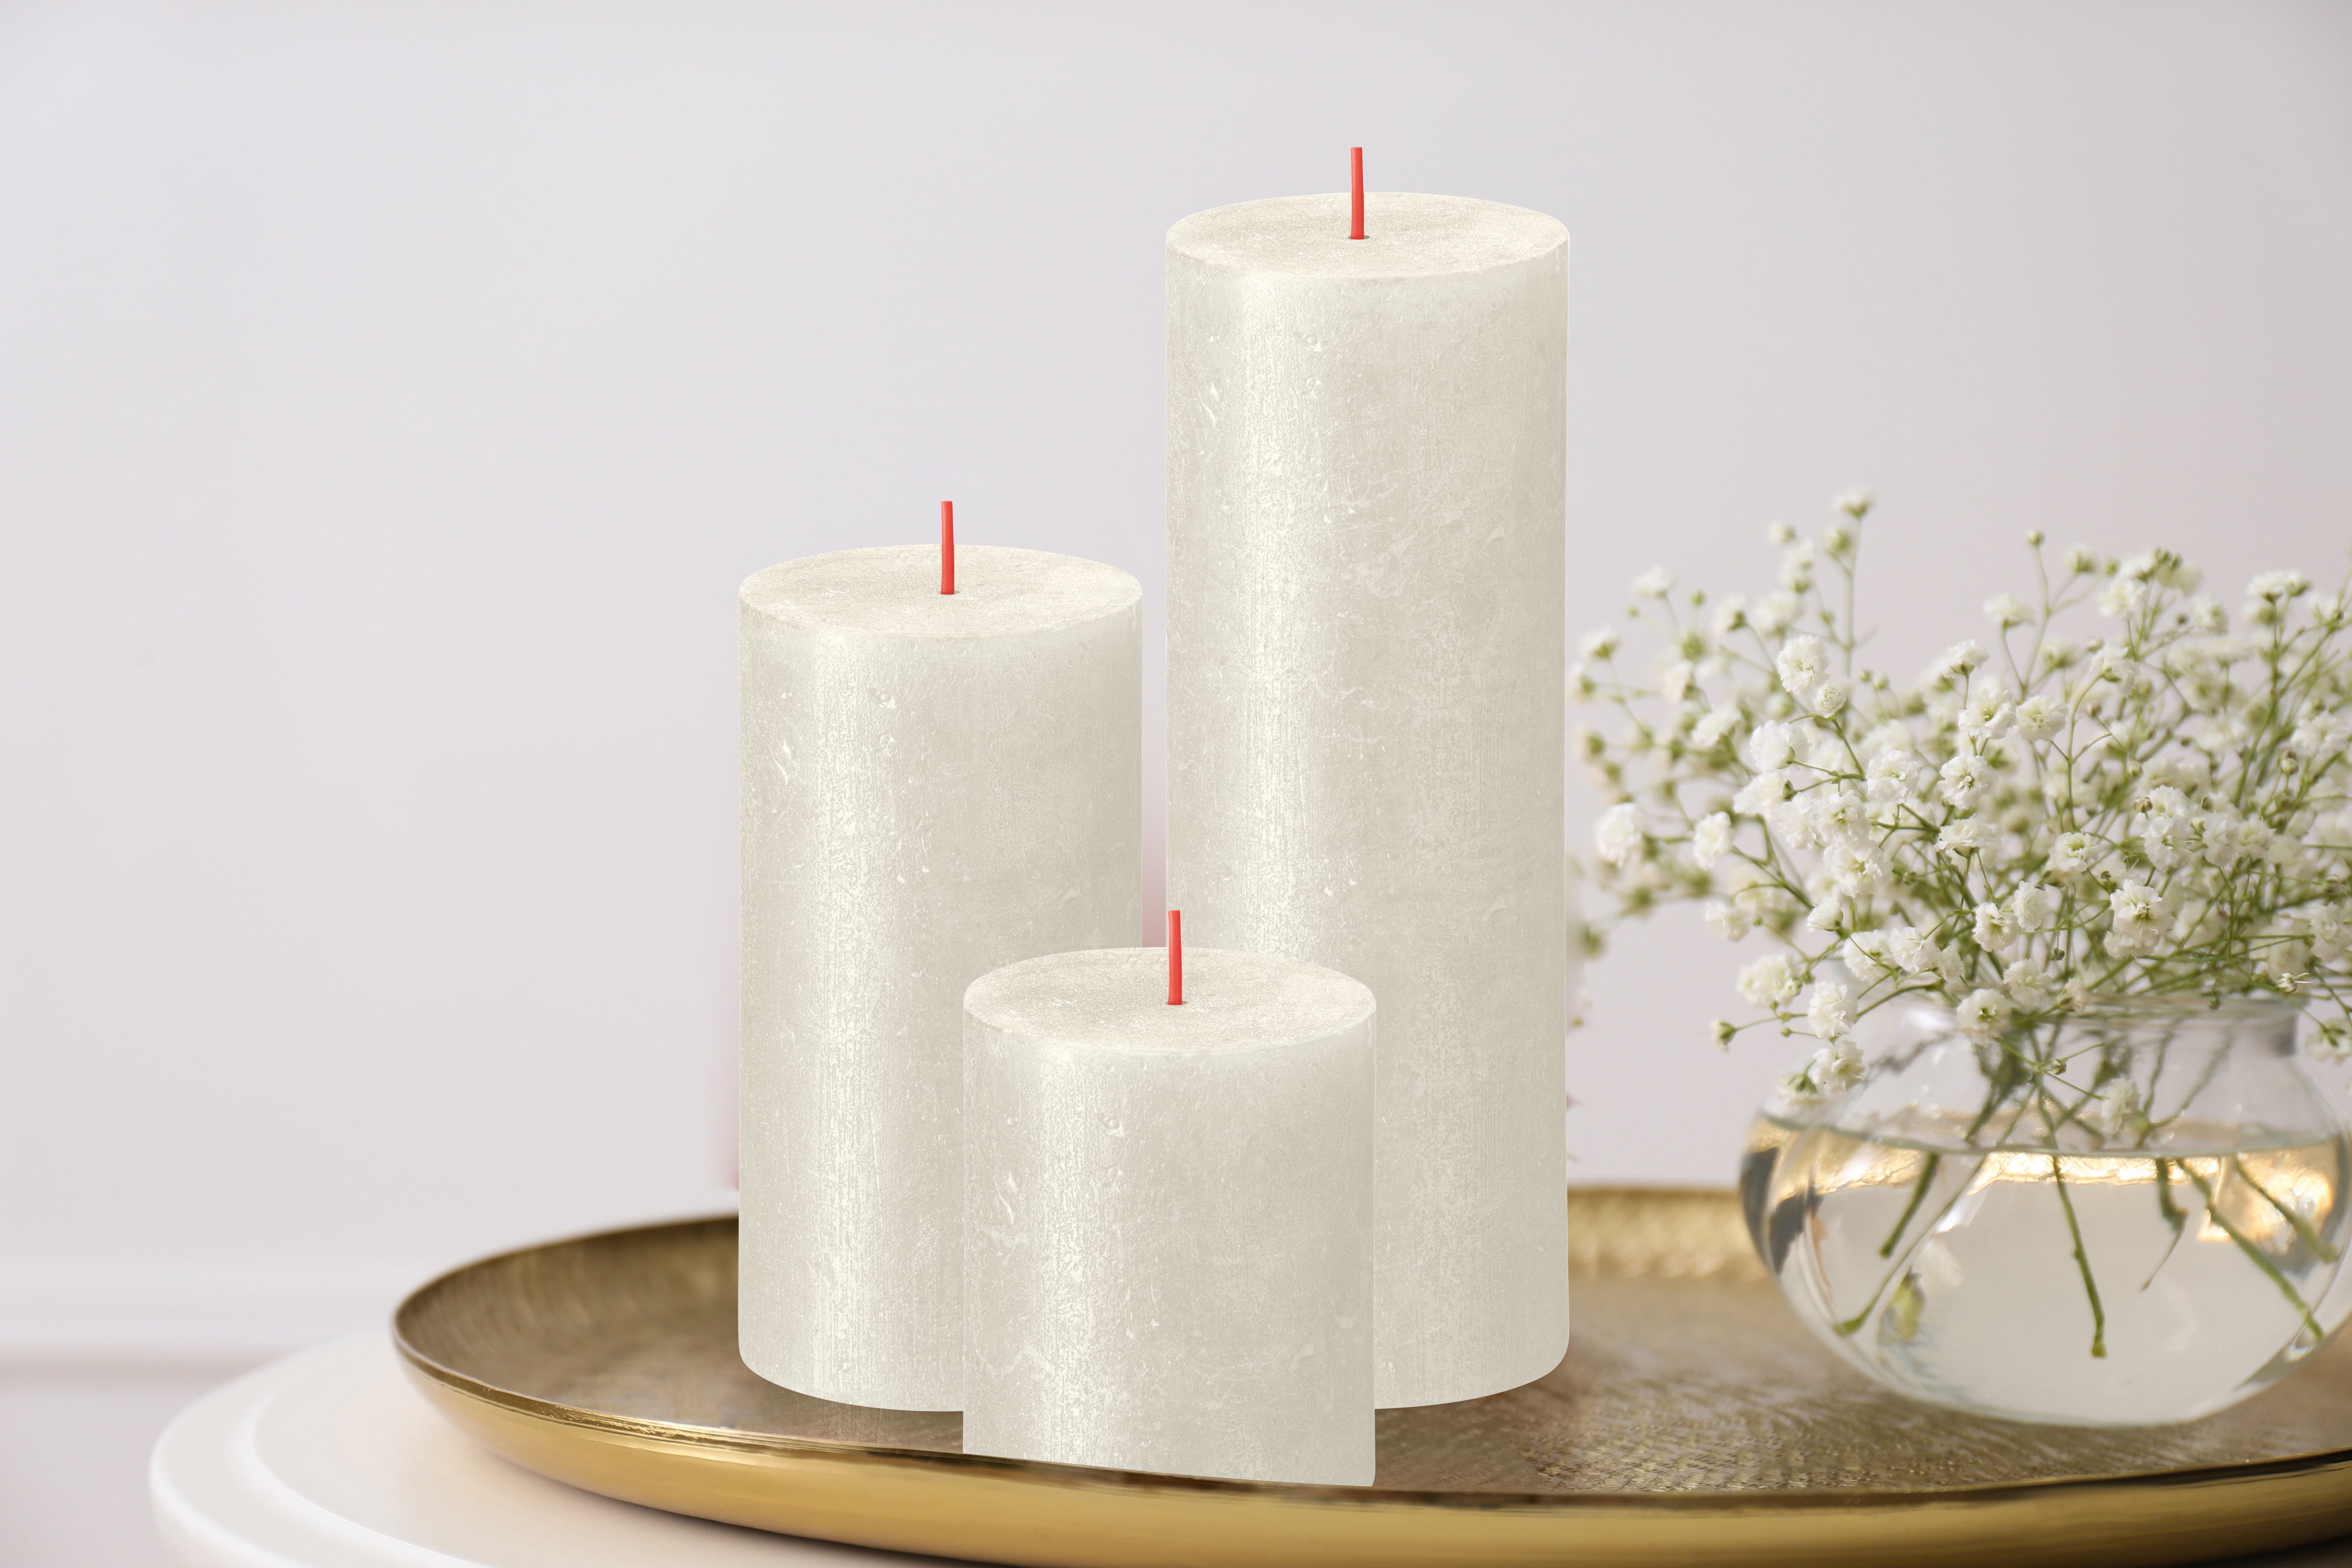 Lbh- 4.7x4.7x5.5 Grey Imported Burnt Shape Pillar Candle Mould